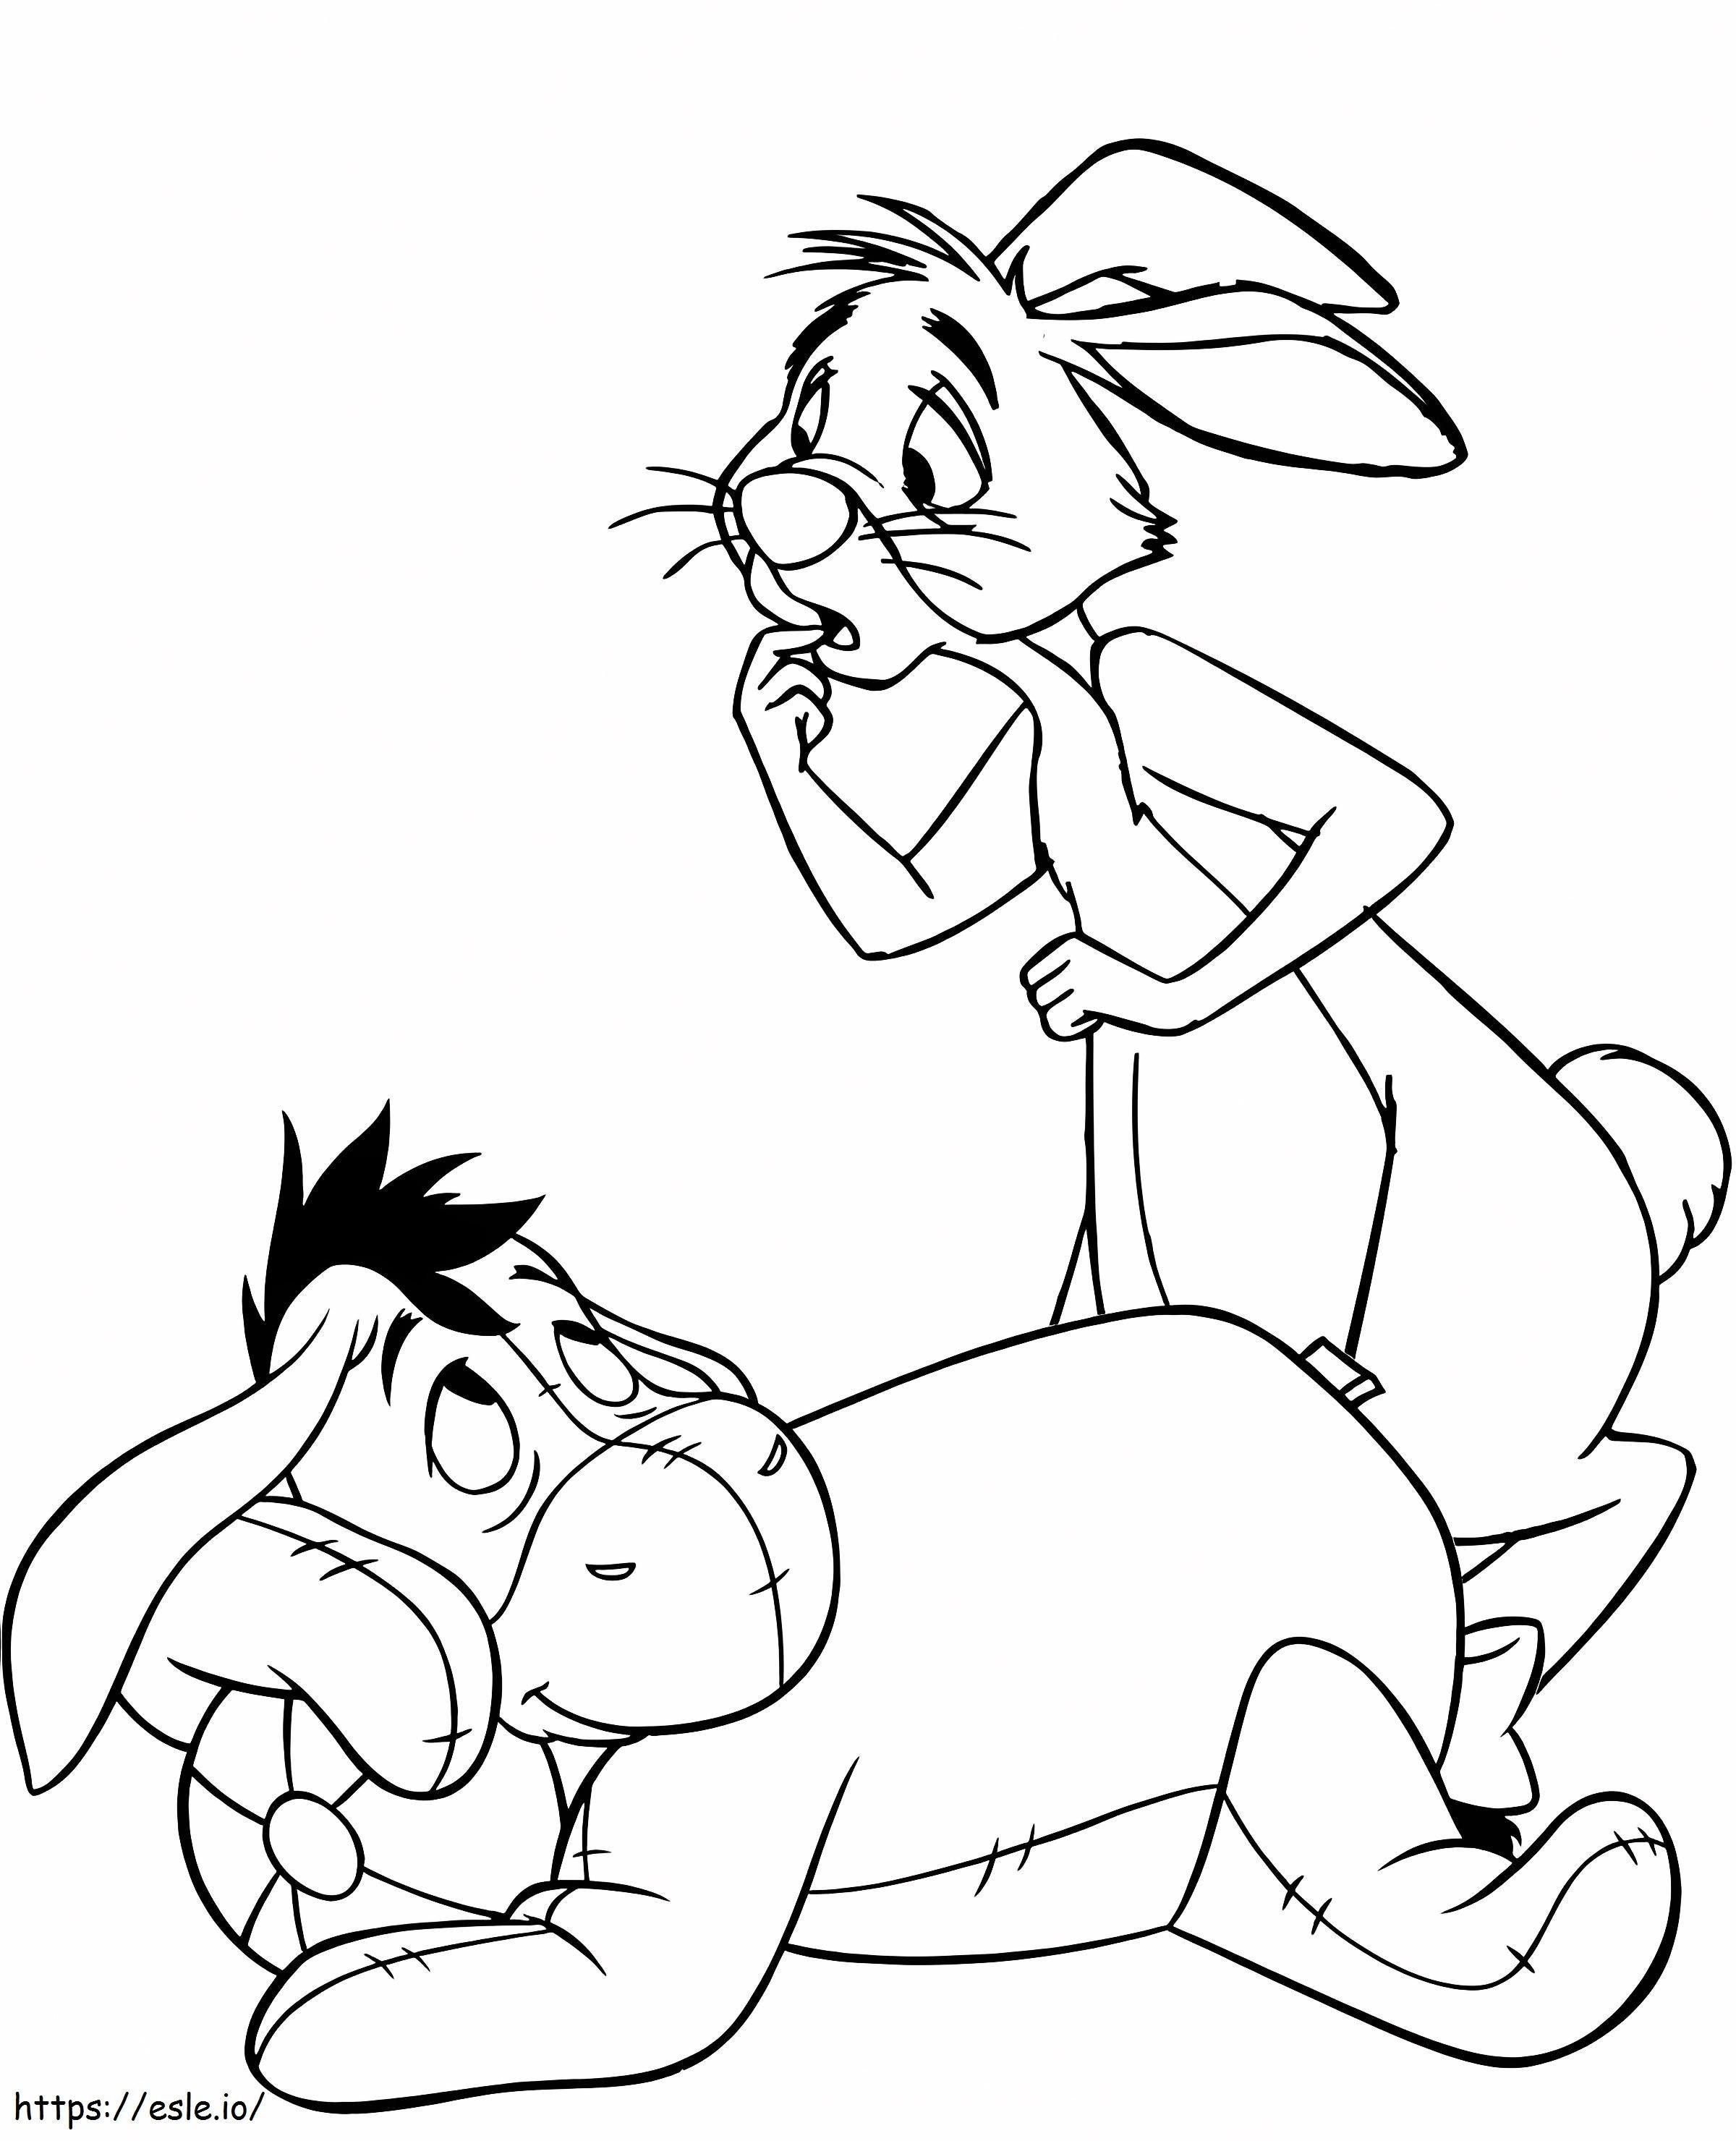 1526806958 Eeyore And Rabbit Pooh coloring page